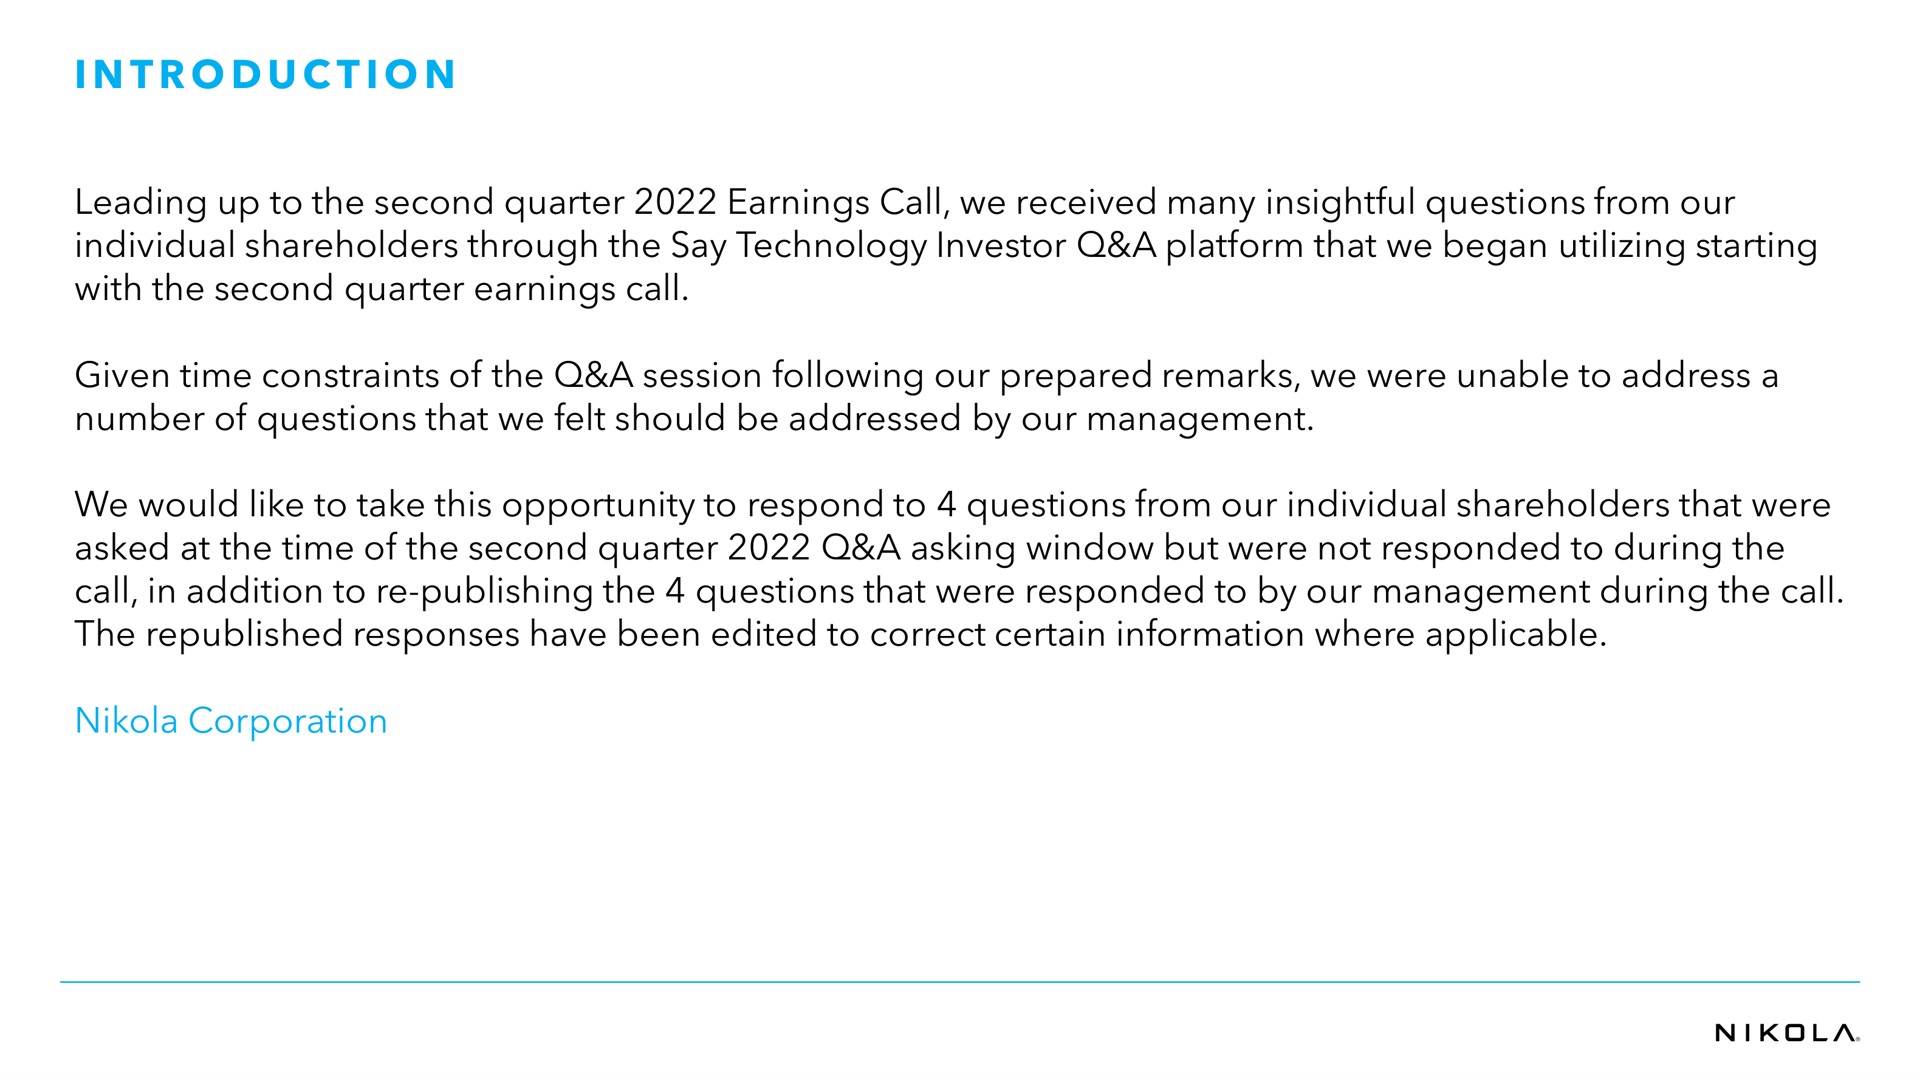 i i leading up to the second quarter earnings call we received many insightful questions from our individual shareholders through the say technology investor a platform that we began utilizing starting with the second quarter earnings call given time constraints of the a session following our prepared remarks we were unable to address a number of questions that we felt should be addressed by our management we would like to take this opportunity to respond to questions from our individual shareholders that were asked at the time of the second quarter a asking window but were not responded to during the call in addition to publishing the questions that were responded to by our management during the call the republished responses have been edited to correct certain information where applicable corporation introduction | Nikola